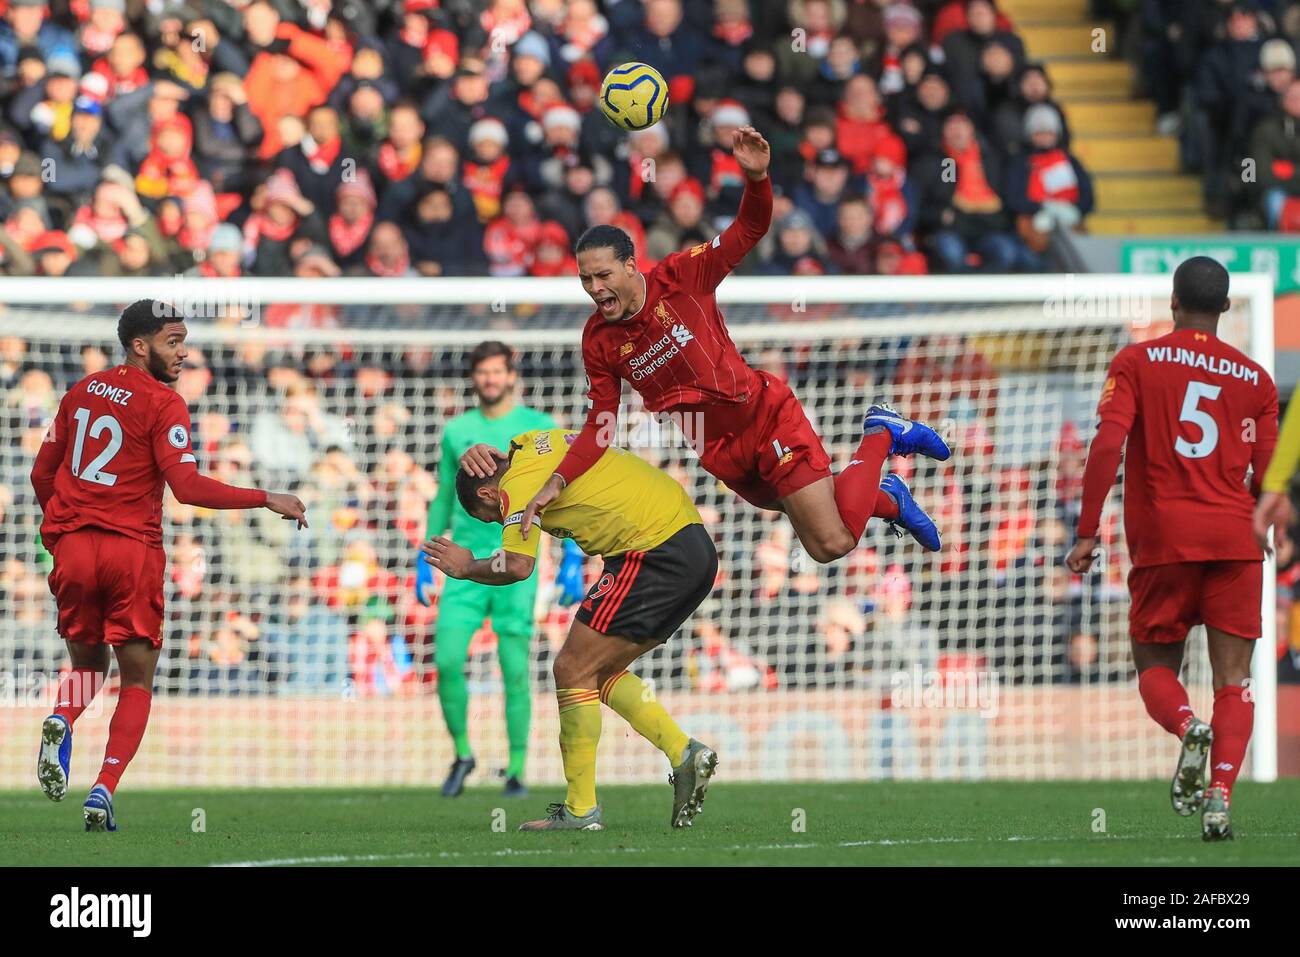 14th December 2019, Anfield, Liverpool, England; Premier League, Liverpool  v Watford : Virgil van Dijk (4) of Liverpool and Troy Deeney (9) of Watford  dual for the ball Credit: Mark Cosgrove/News Images